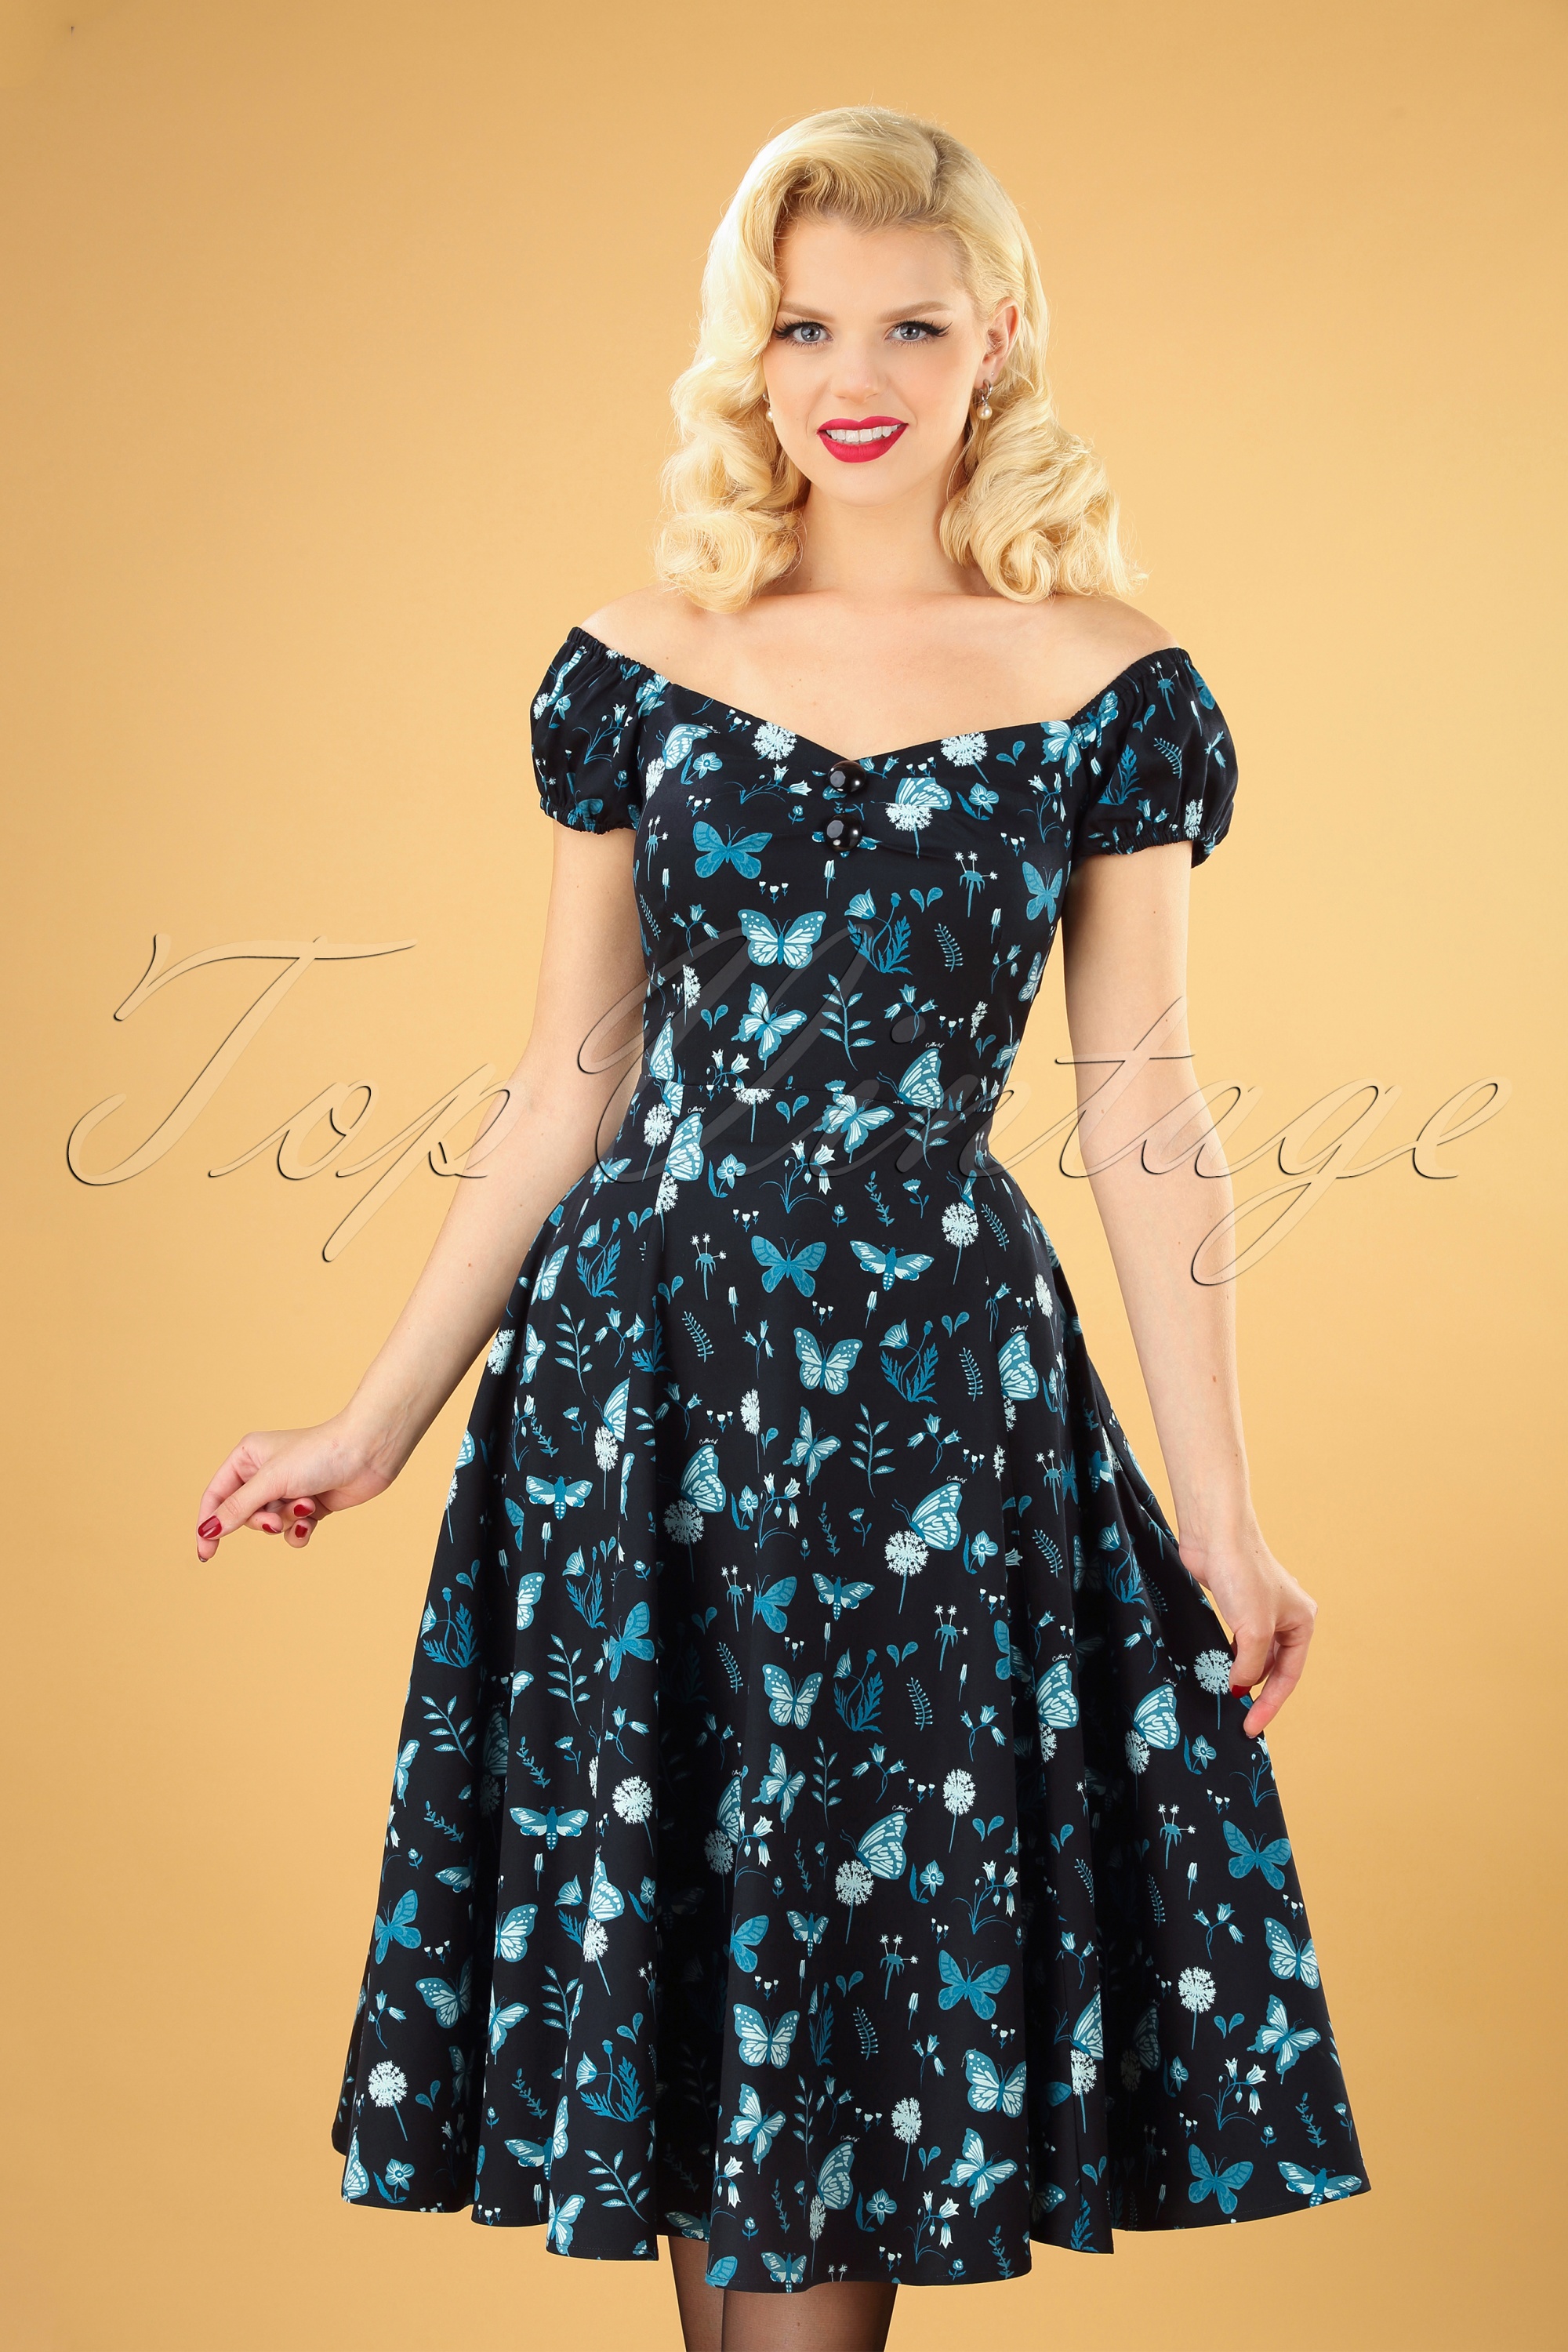 Collectif Clothing - Dolores Midnight Butterfly poppenjurk in zwart